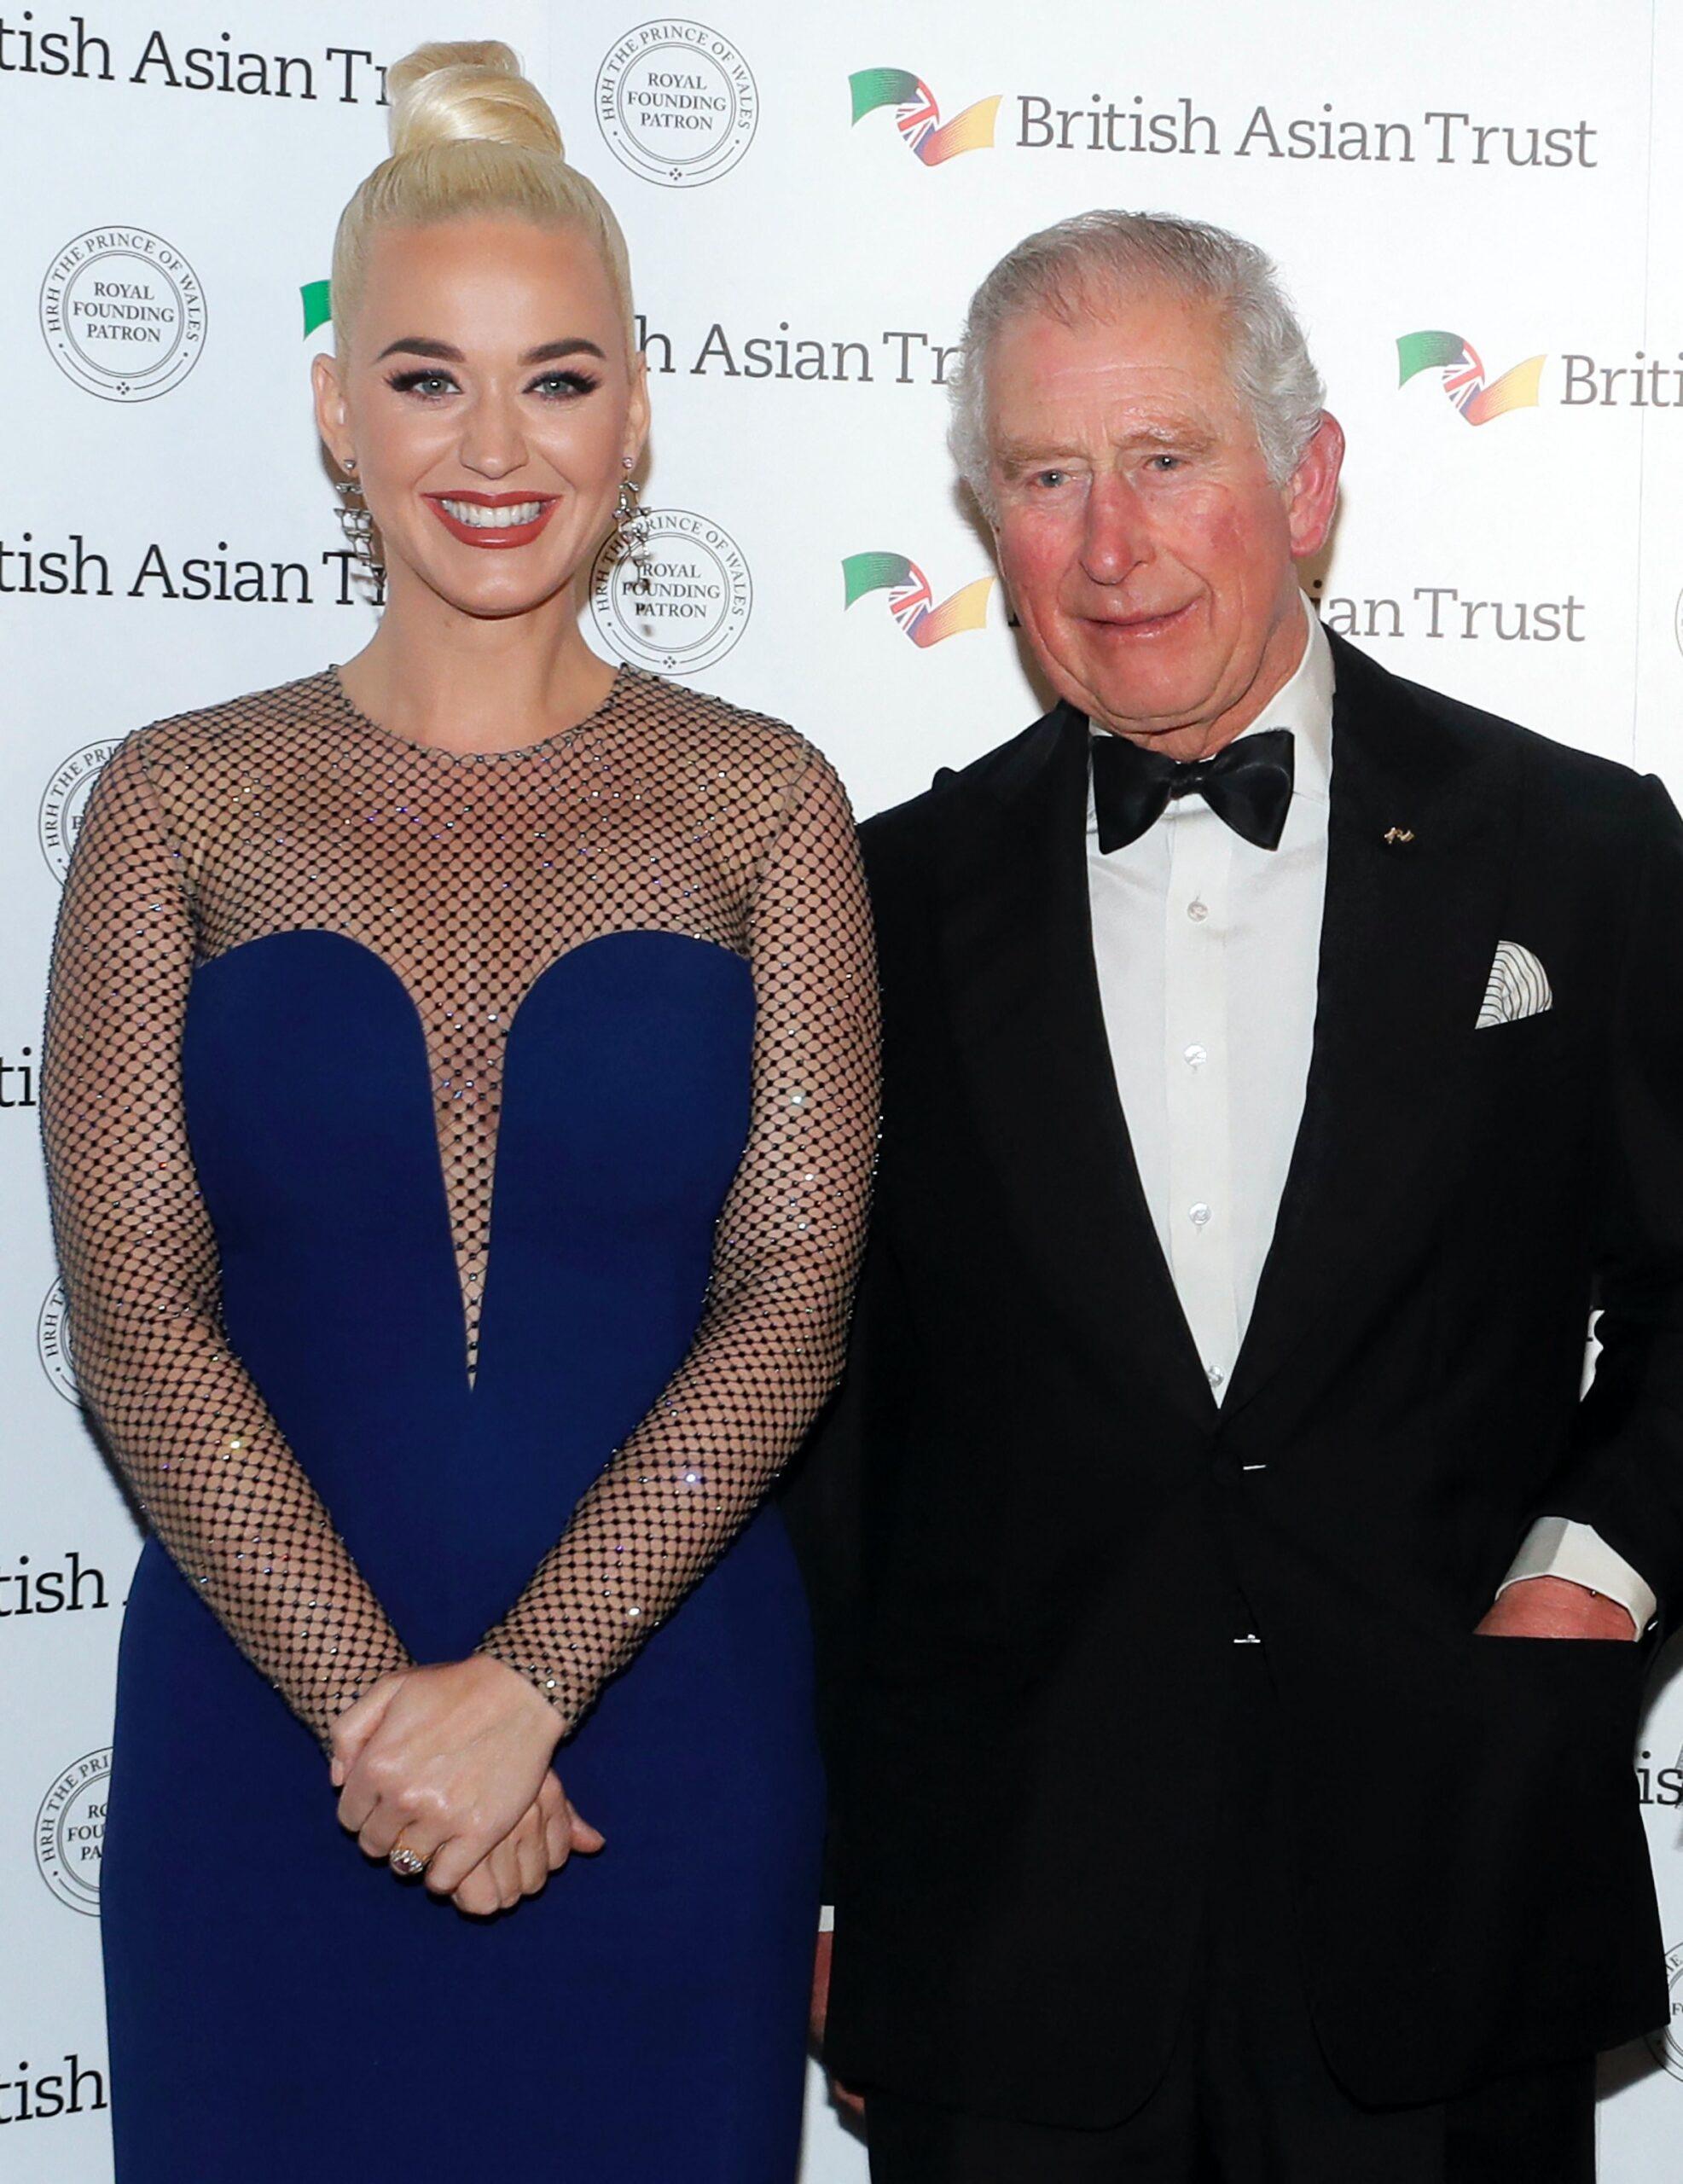 King Charles meets Katy Perry at a reception to celebrate the British Asian Trust at Banqueting House, London, UK, on the 4th February 2020.